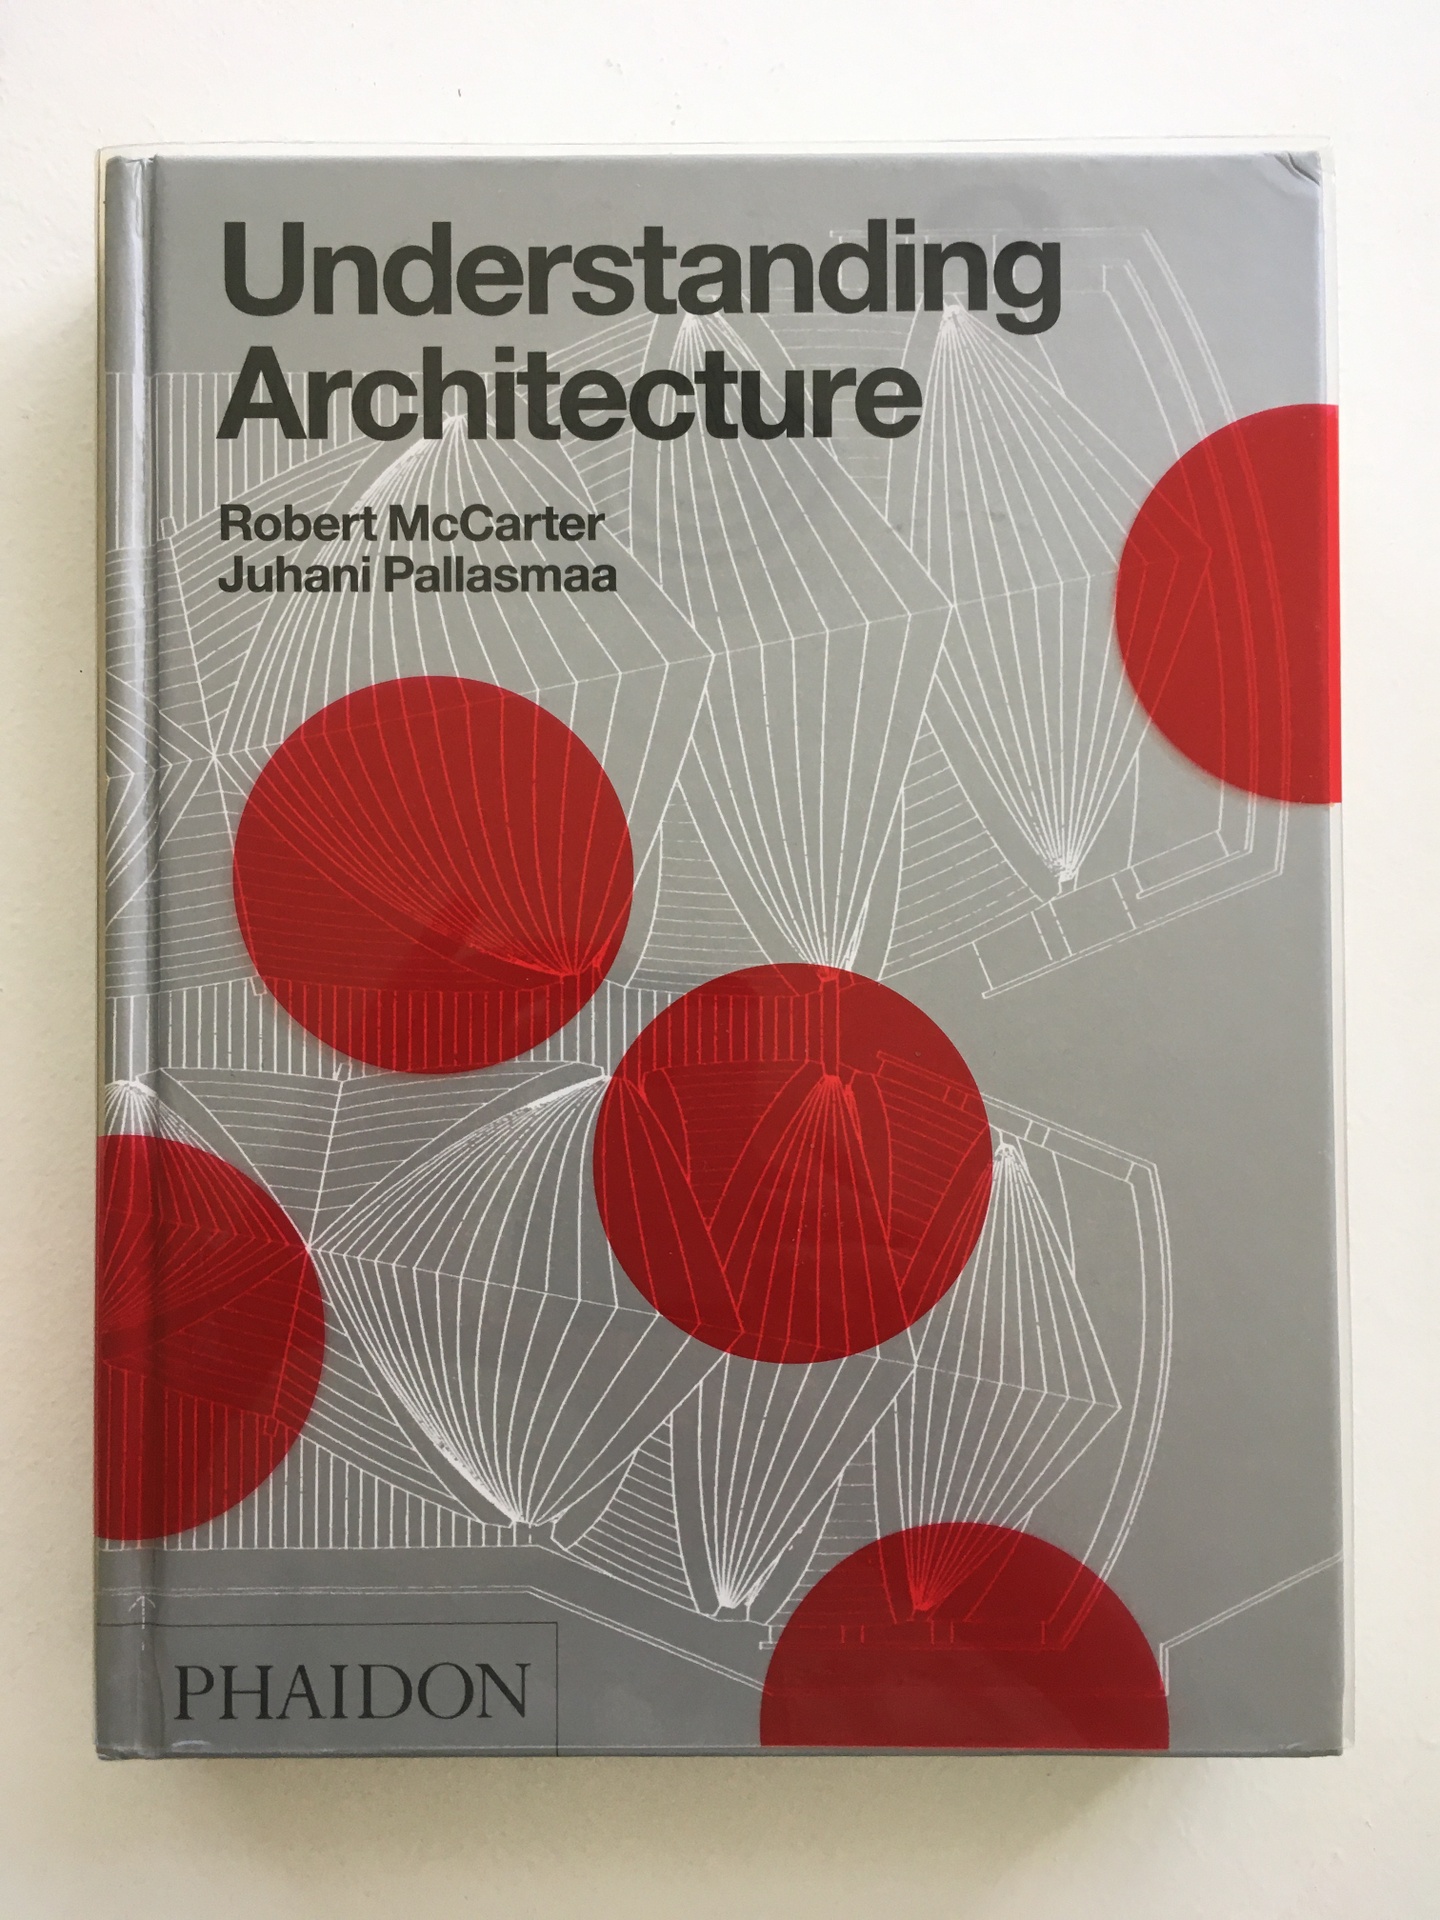 Cover of Understanding Architecture, with a blue-gray background with white 3D linework and red circles over the top.